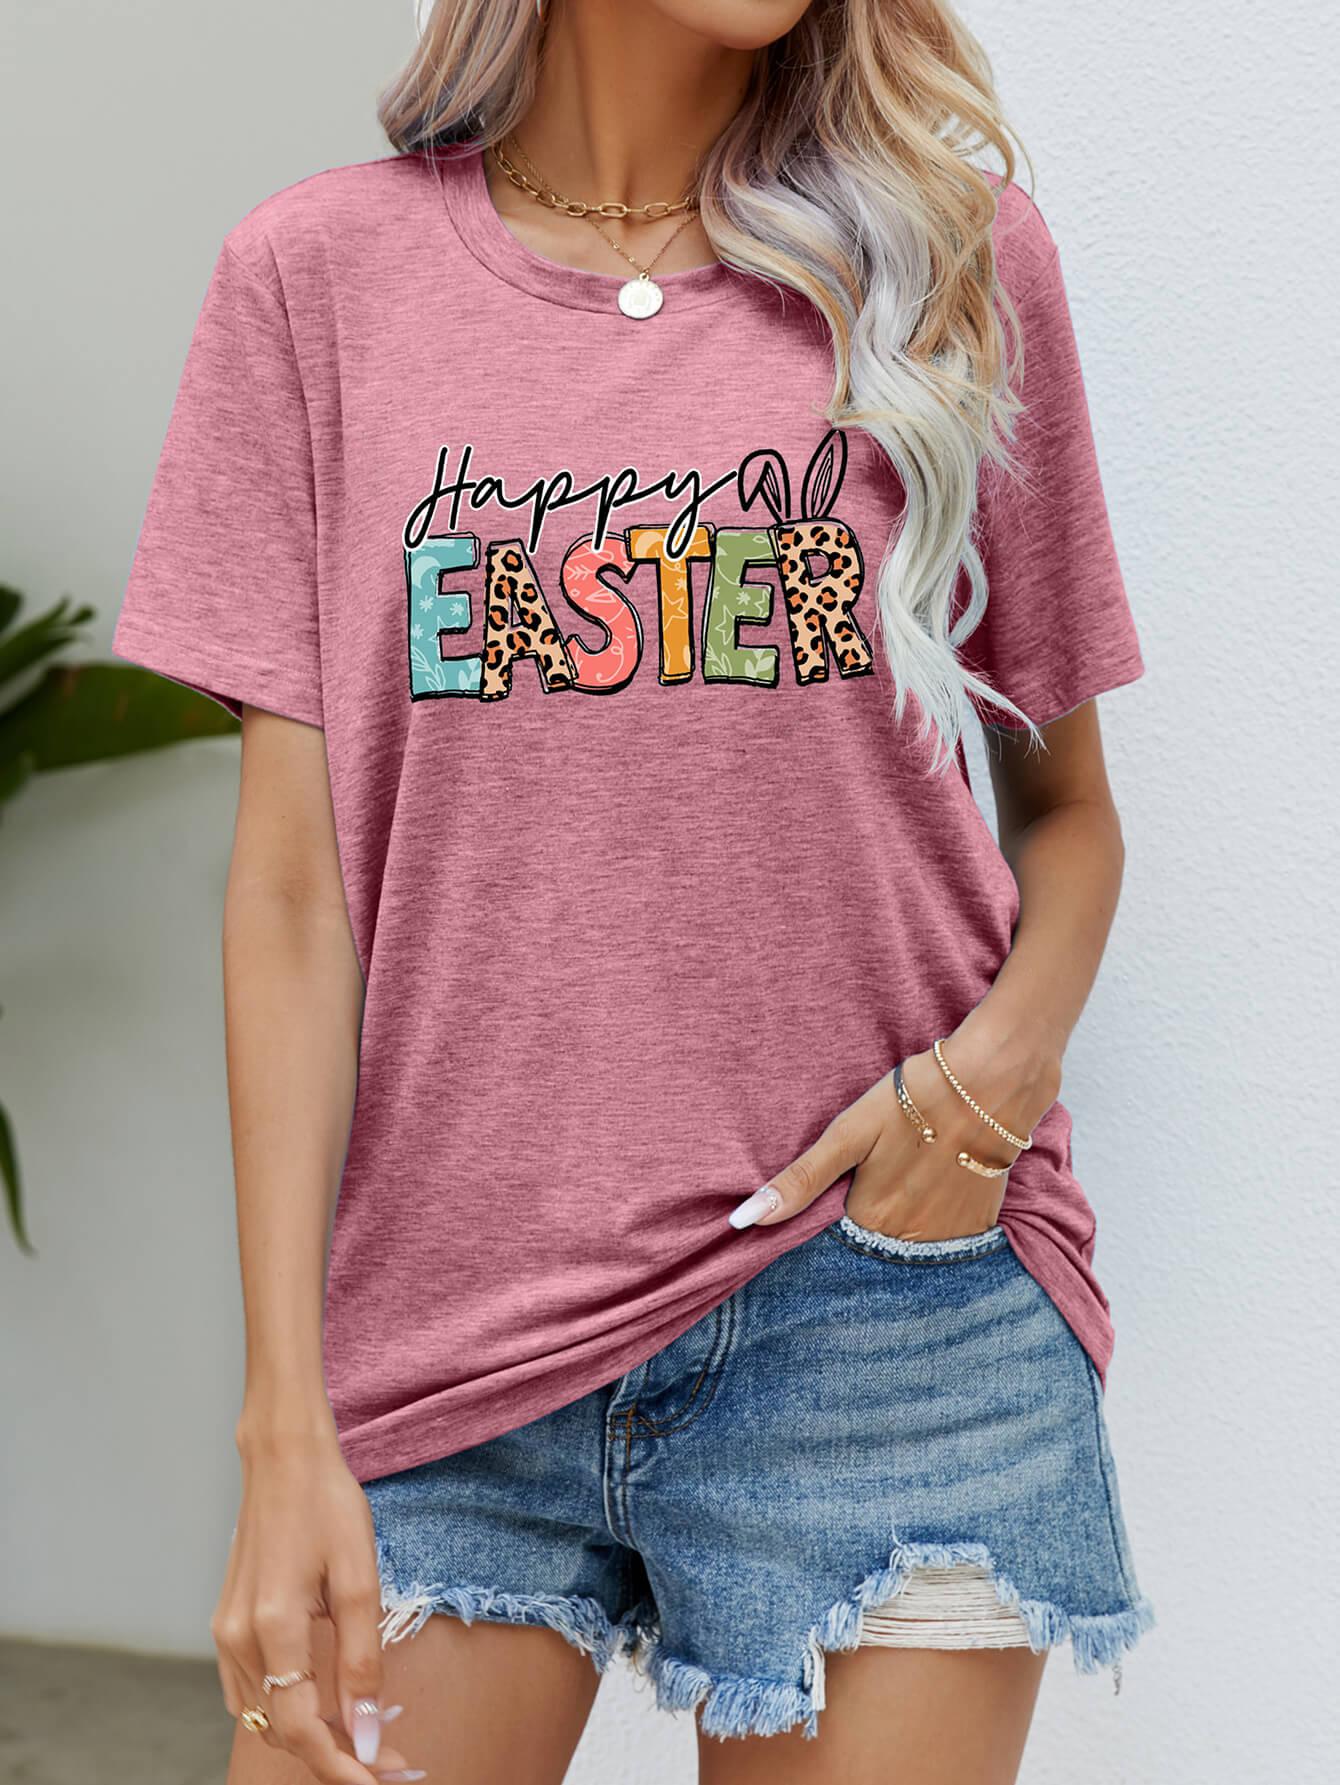 HAPPY EASTER Graphic Round Neck Tee Shirt-TOPS / DRESSES-[Adult]-[Female]-Rouge Pink-S-2022 Online Blue Zone Planet